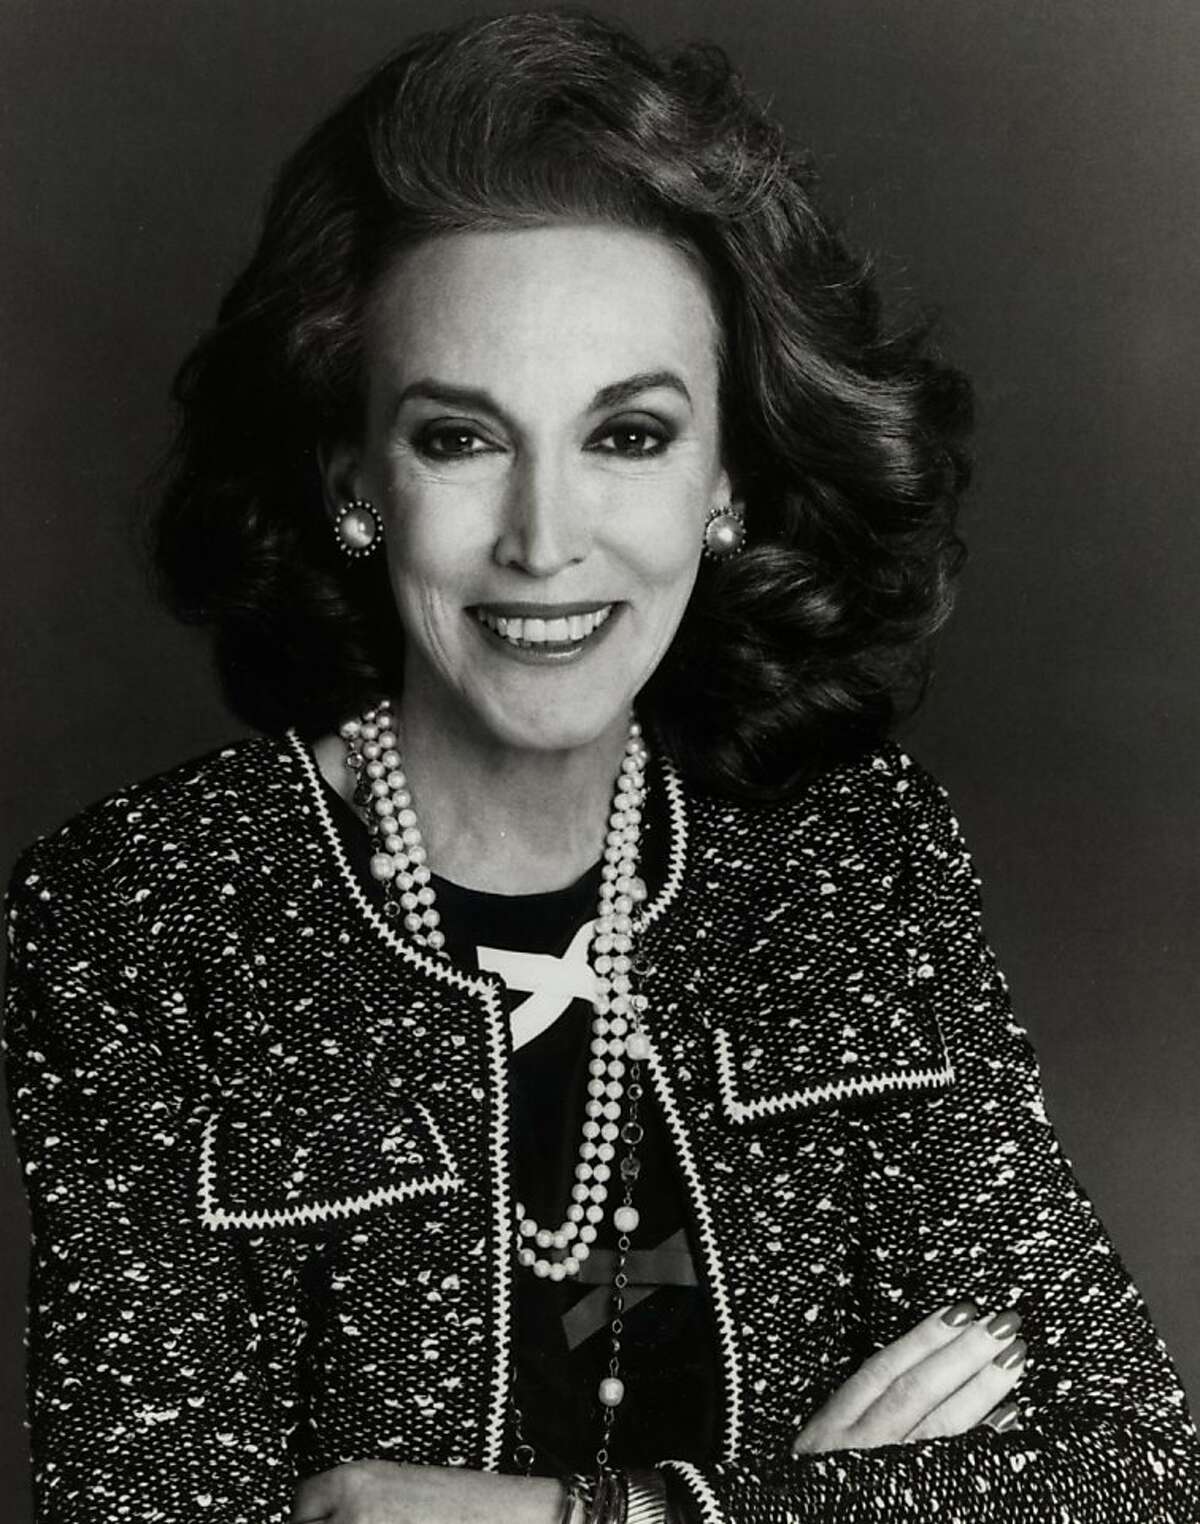 Helen Gurley Brown redefined womanhood for many women and built Cosmopolitan Into global media juggernaut.